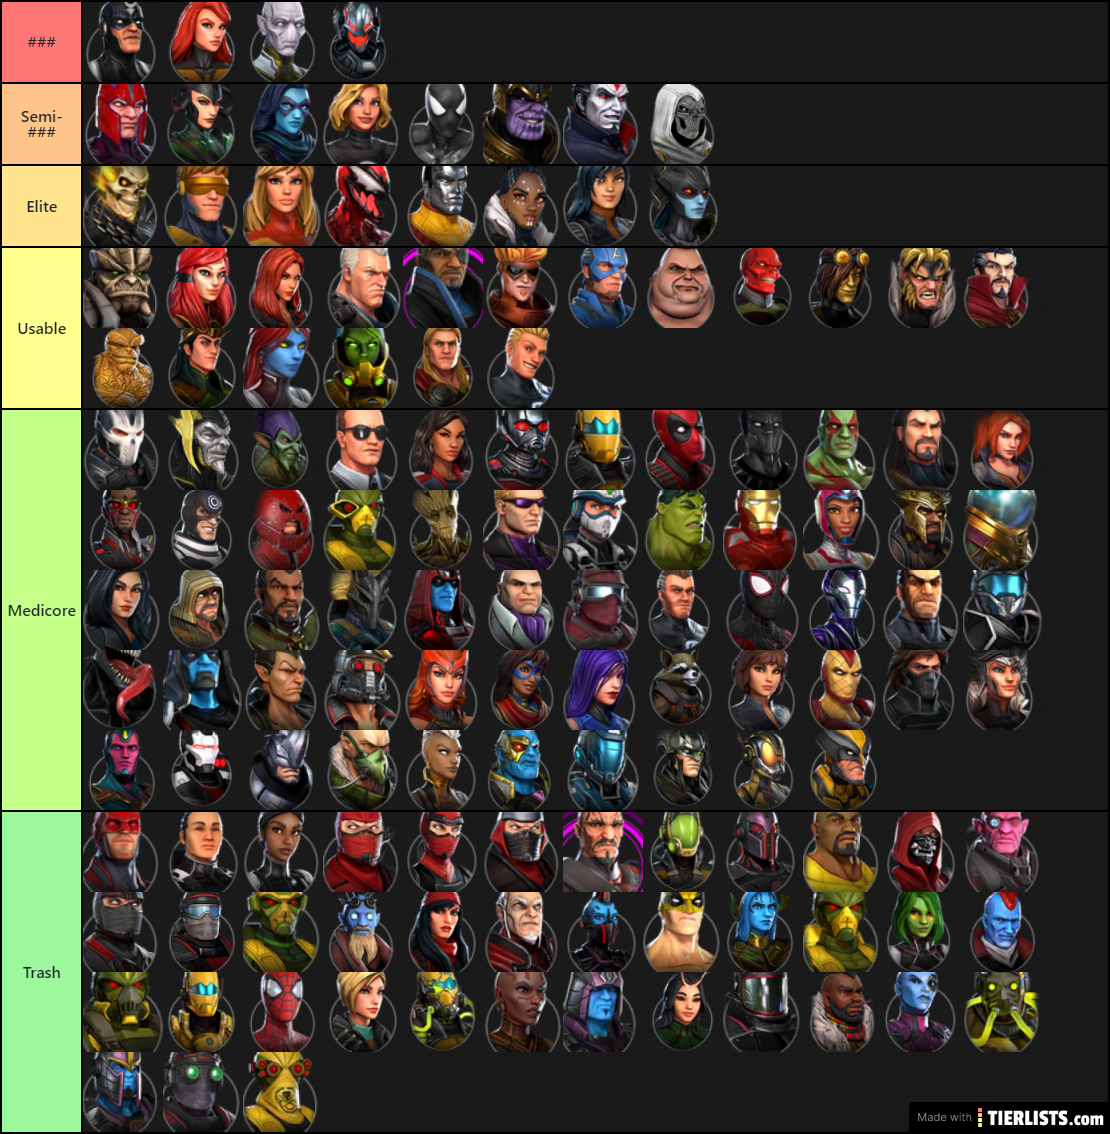 Marvel Strike Force Tier List 2023: Best Characters To Pick